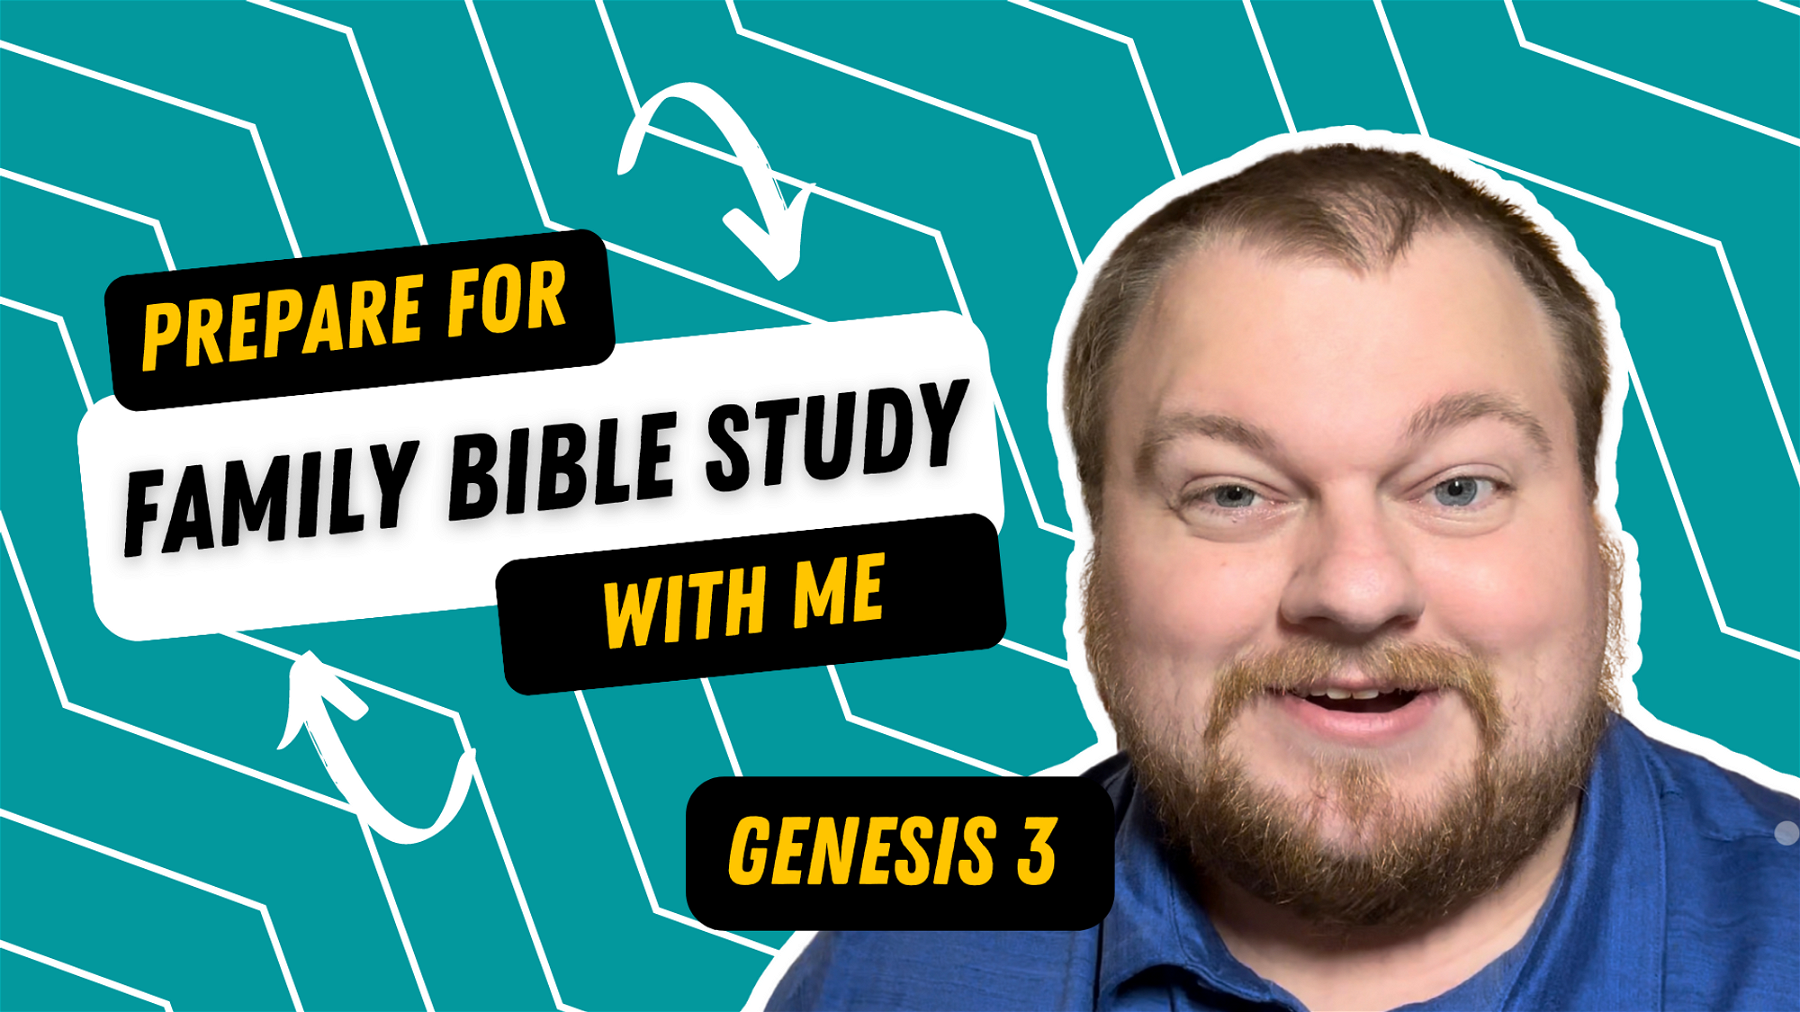 Let’s Study Genesis 3! - Prepare for Family Bible Study With Me